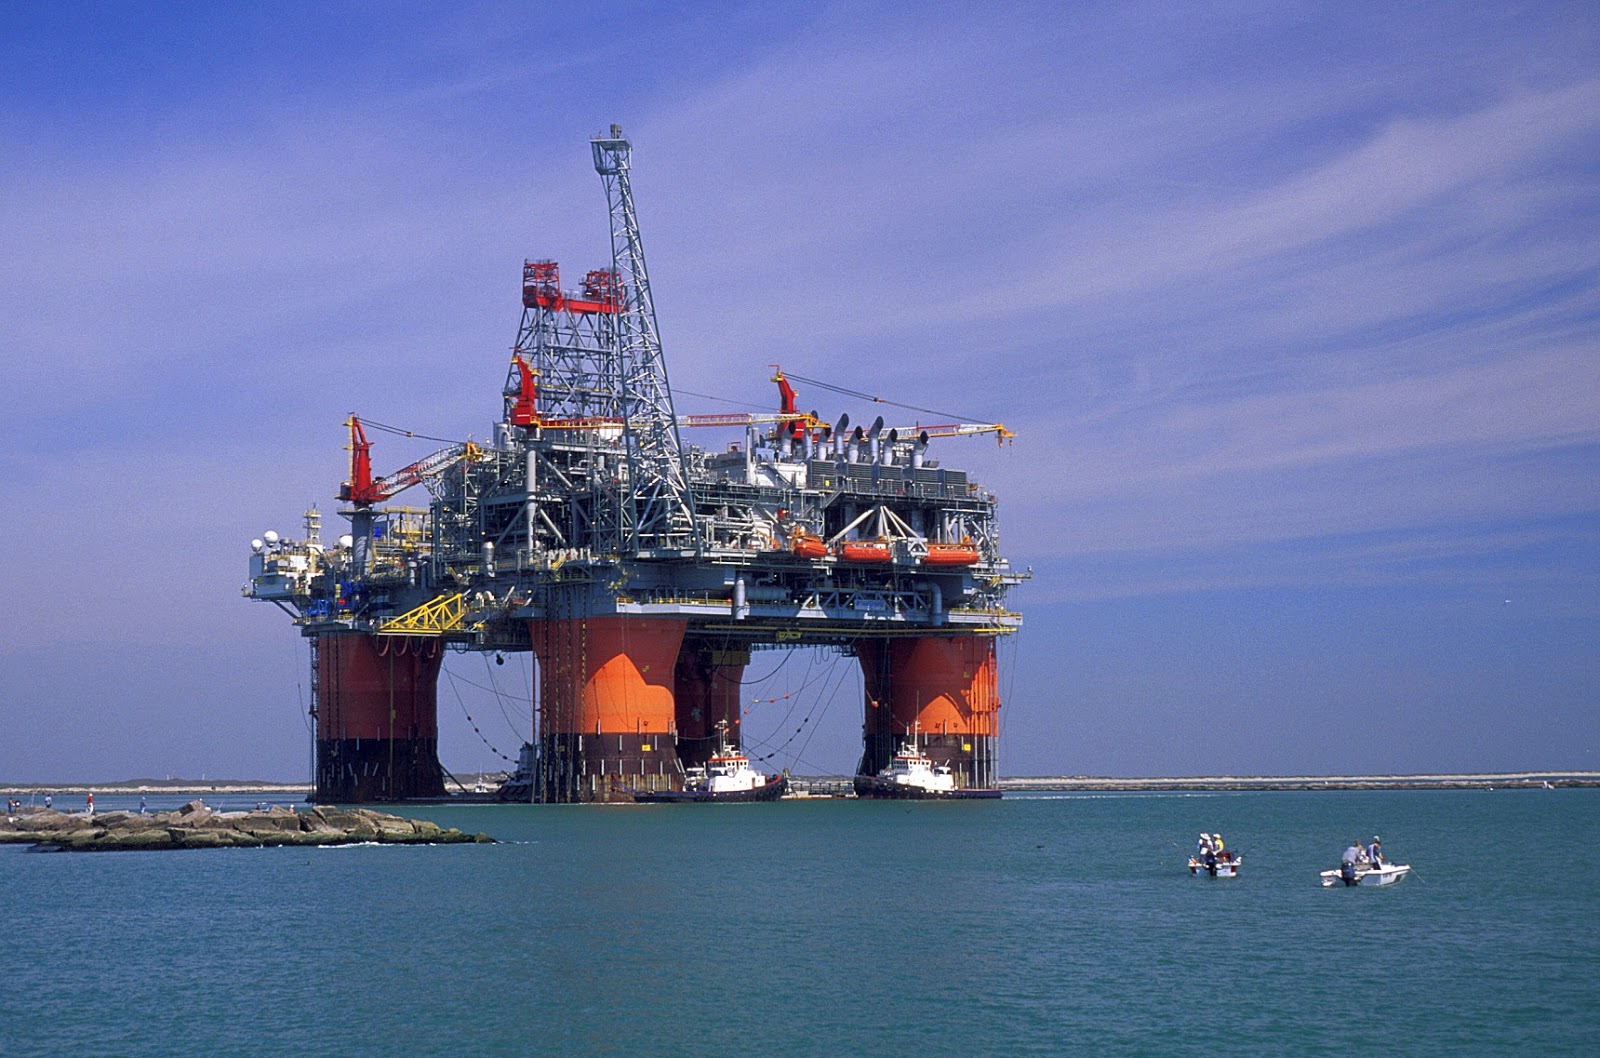 Oil Rig Jobs with No Experience: What is the needed qualifications to ...